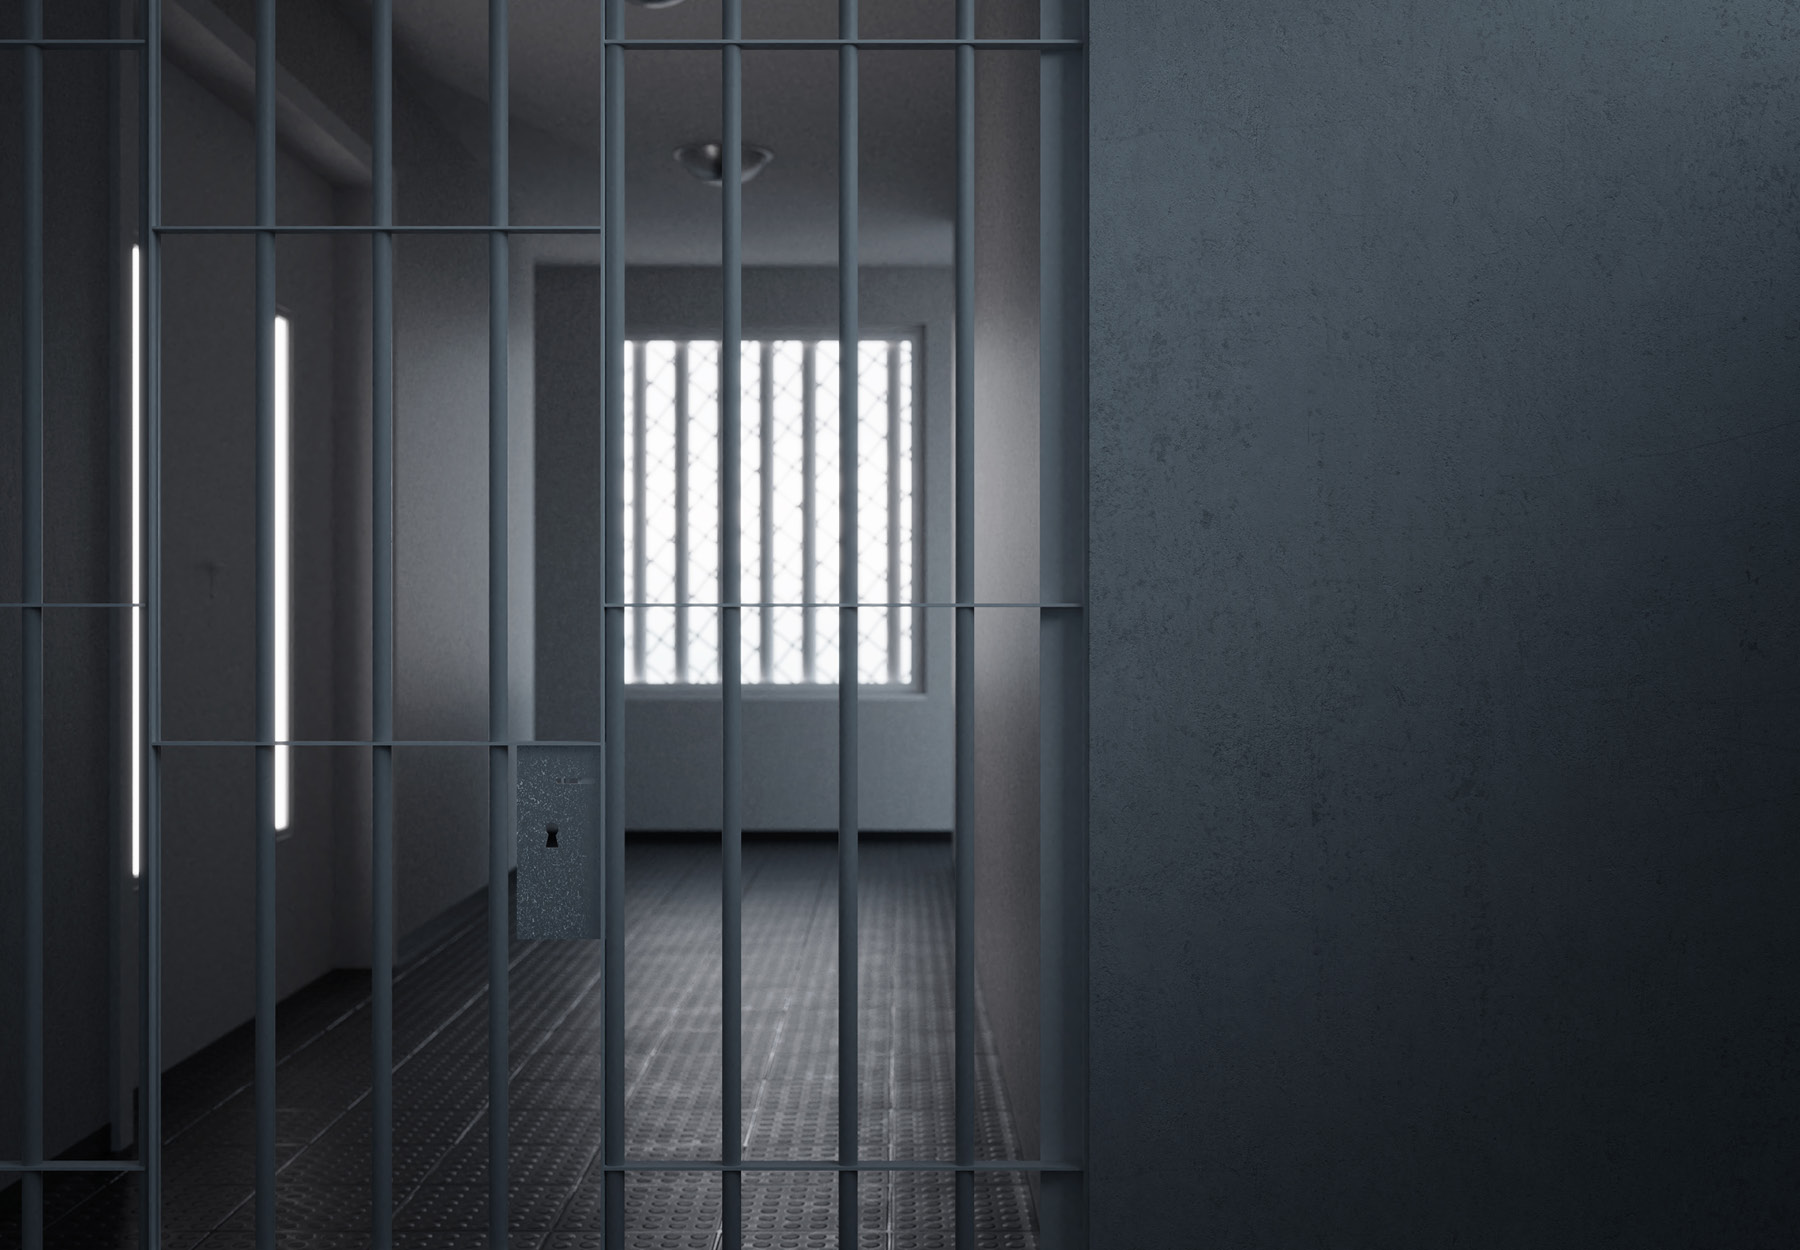 3d rendering of grunge prison wall next to the corridor with stanchions. Prison time concept. iStock image.